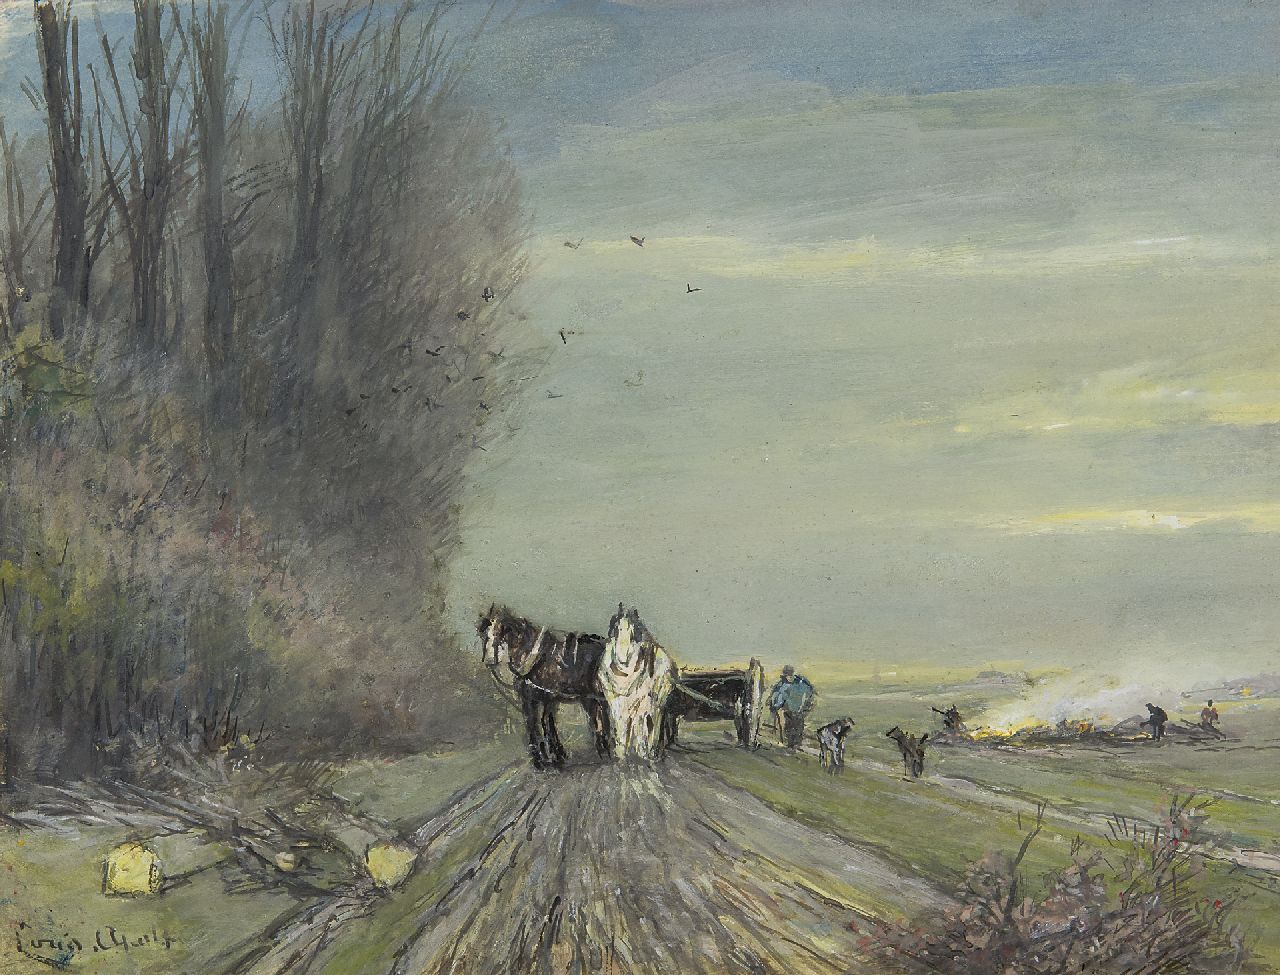 Apol L.F.H.  | Lodewijk Franciscus Hendrik 'Louis' Apol, A horse-drawn cart on a country road in winter, gouache on paper 18.0 x 23.2 cm, signed l.l.